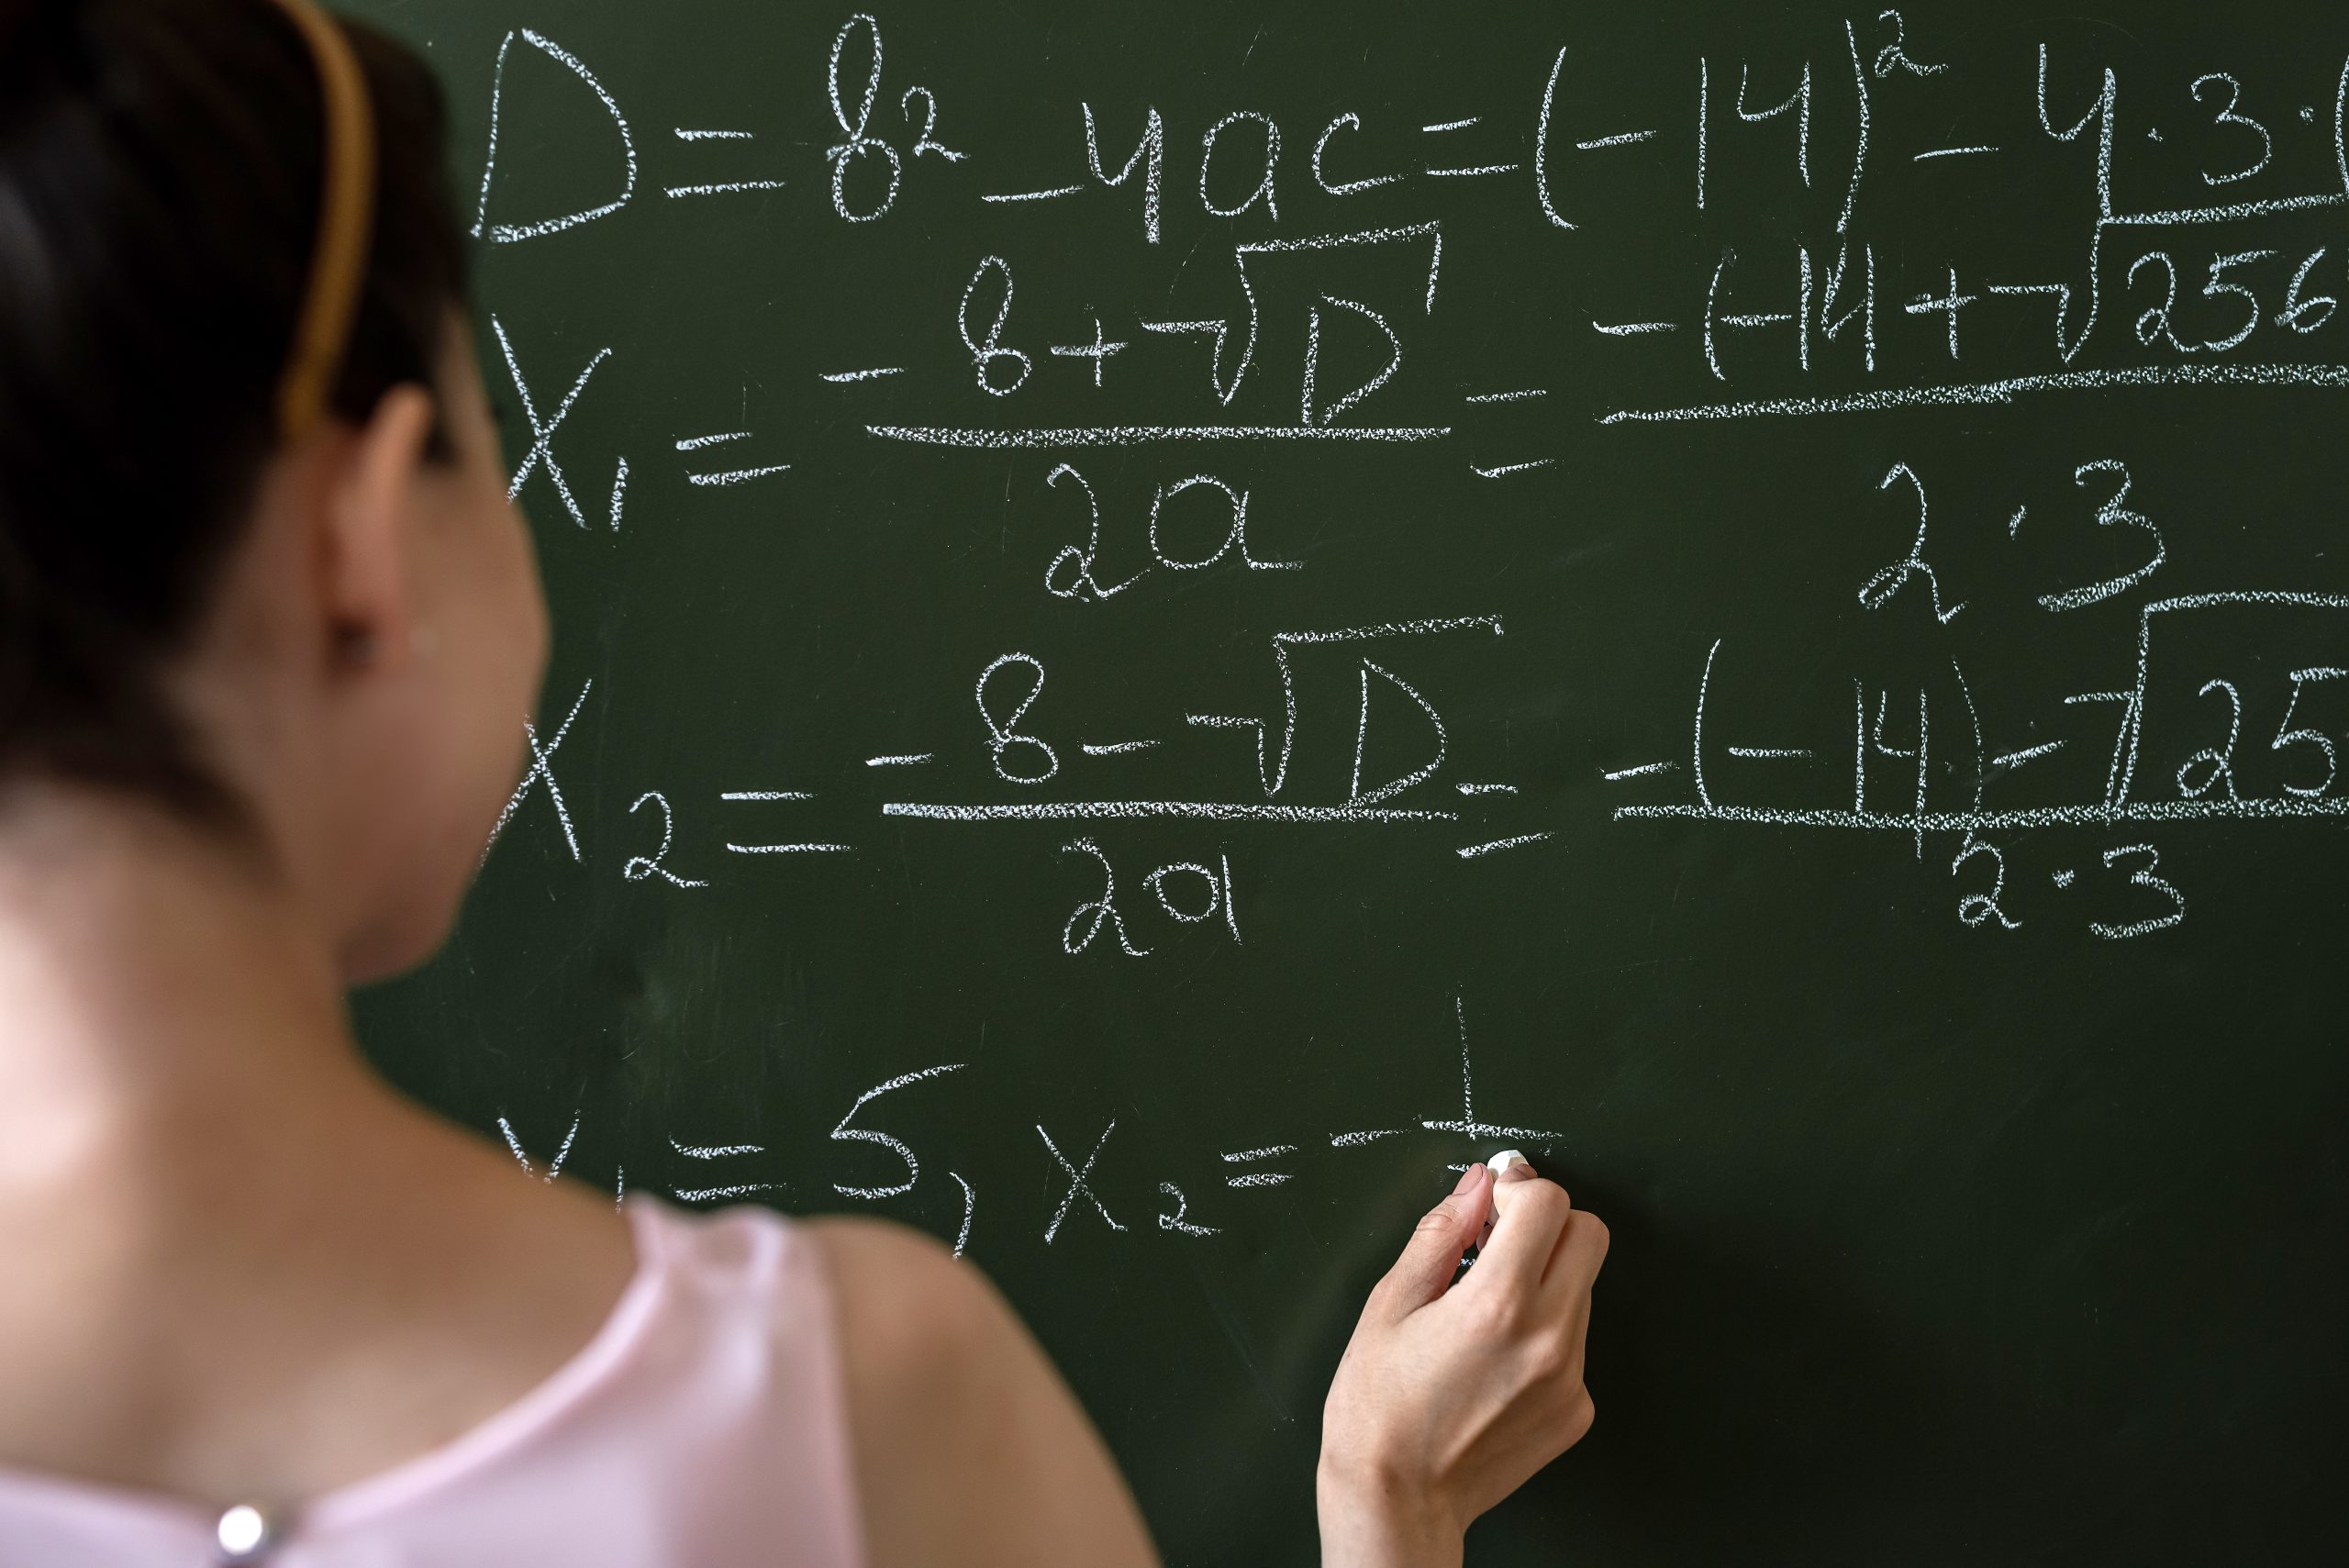 A young student writes math equations on a chalkboard.